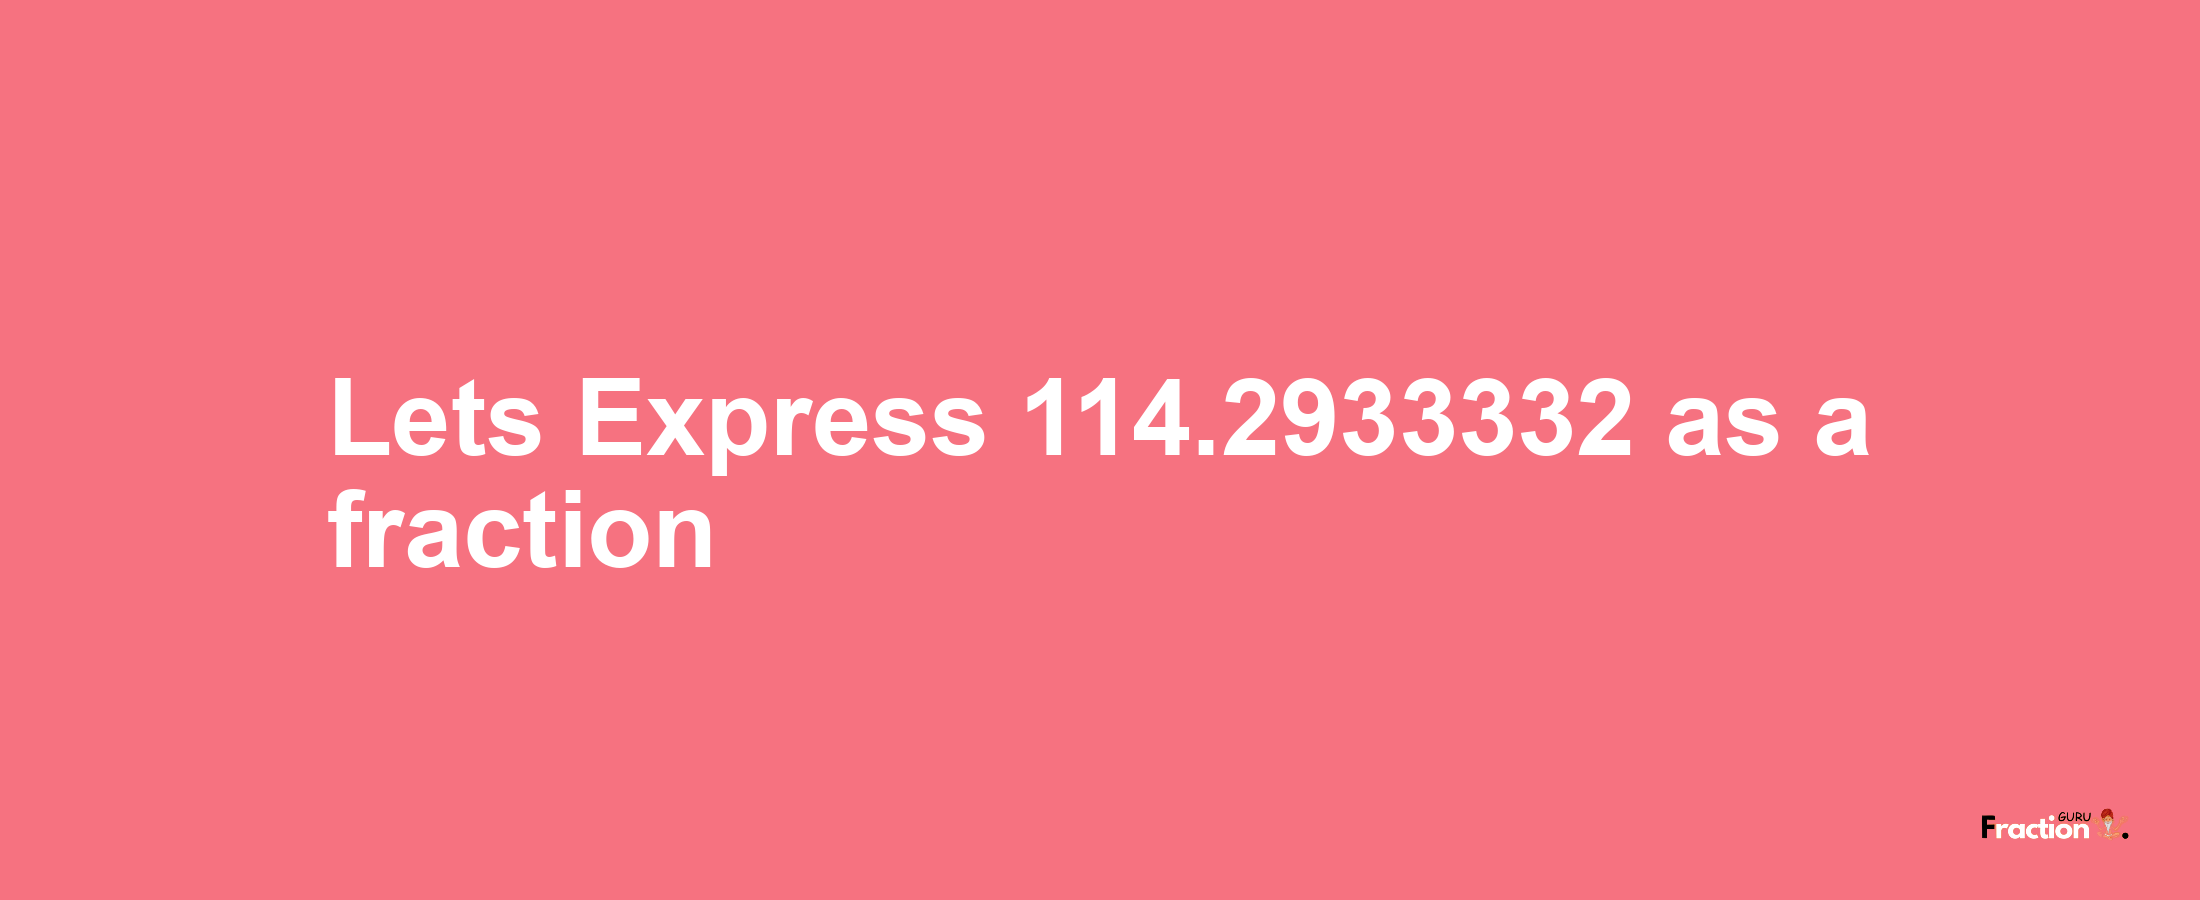 Lets Express 114.2933332 as afraction